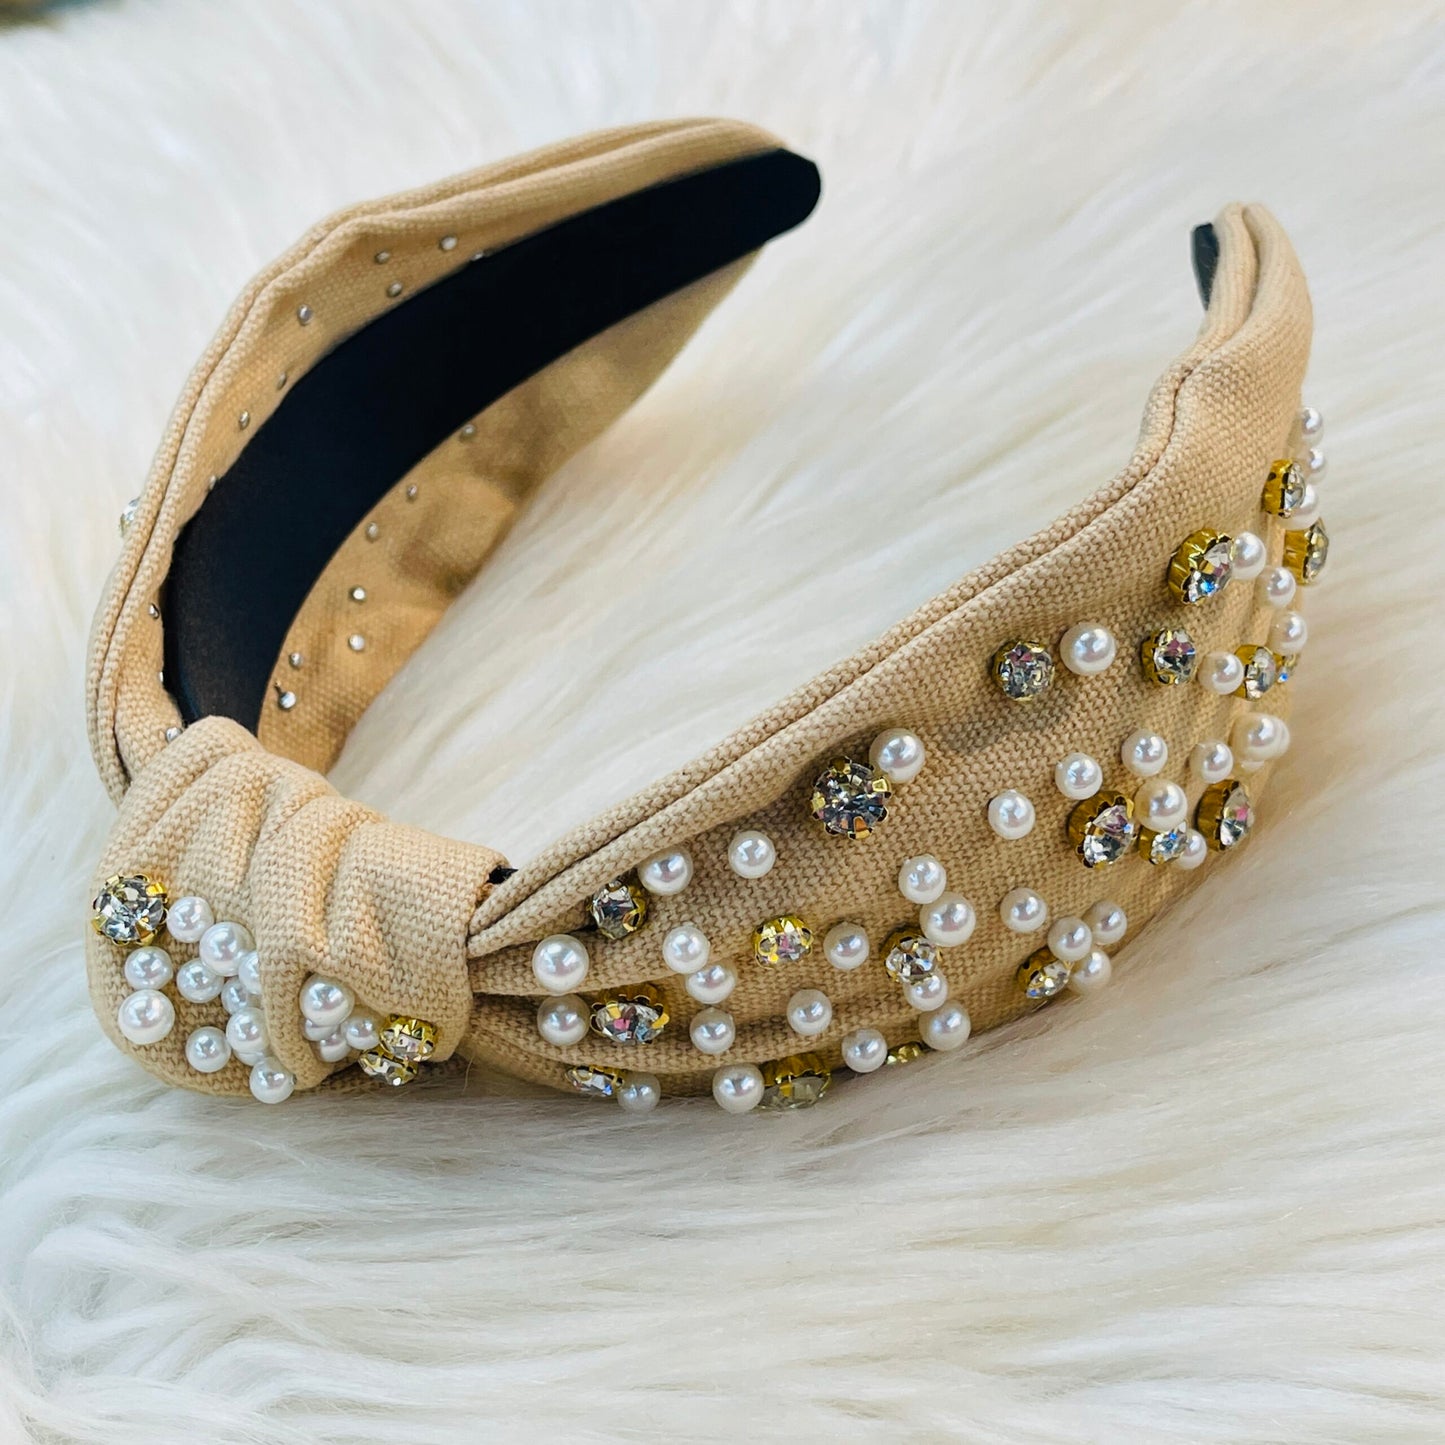 Knotted Pearl Stone Headband